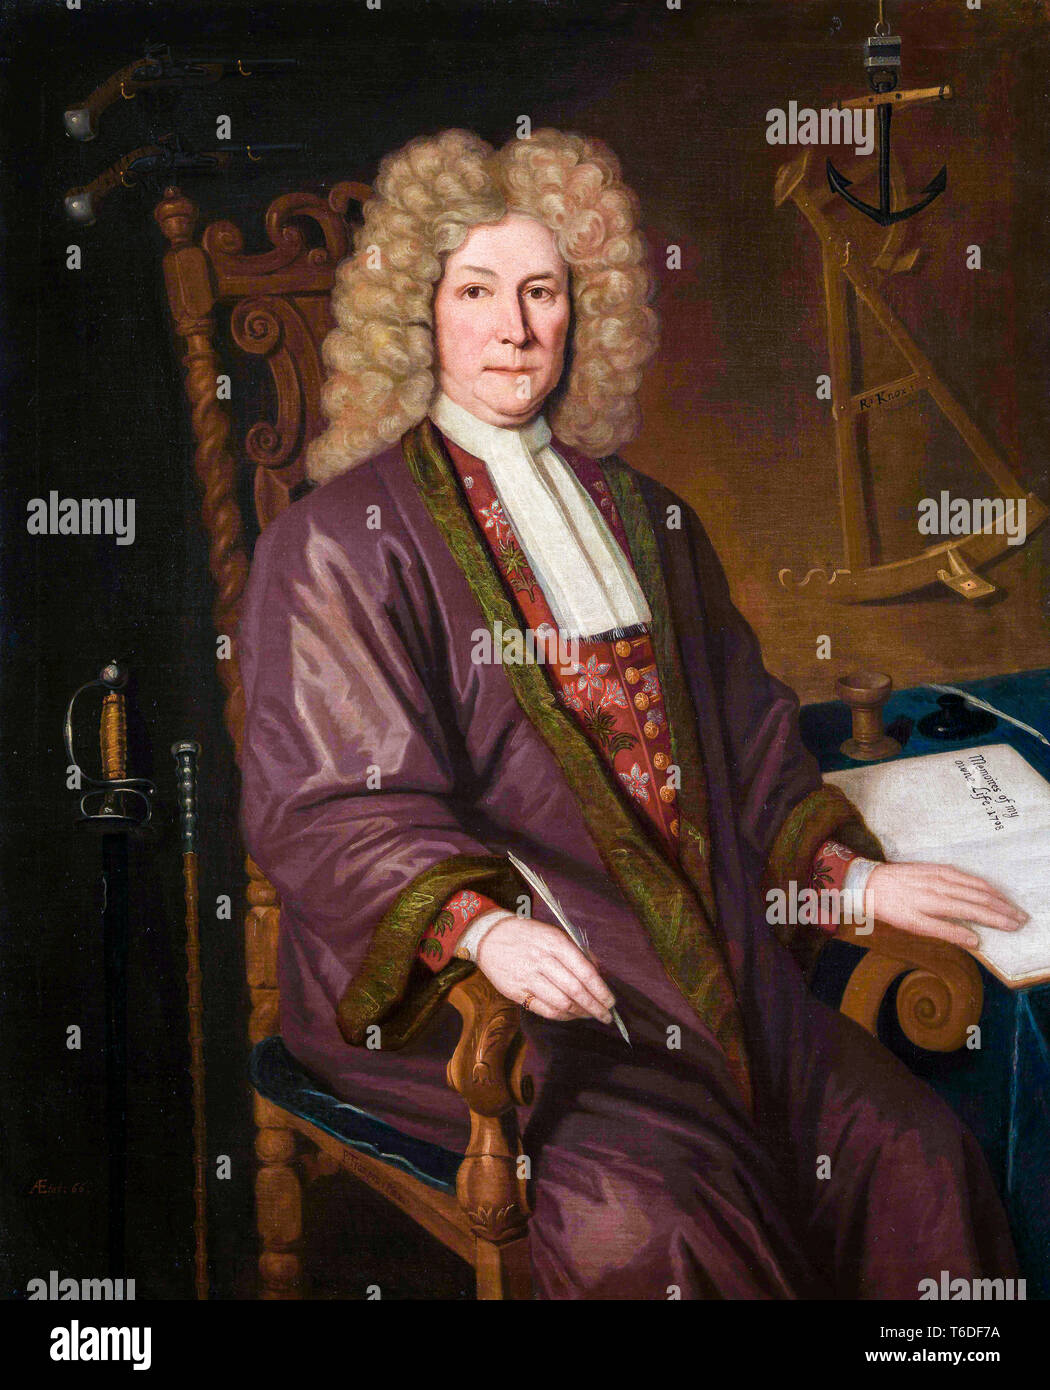 Captain Robert Knox of the East India Company (1641-1720), portrait painting, P. Trampon, 1711 Stock Photo